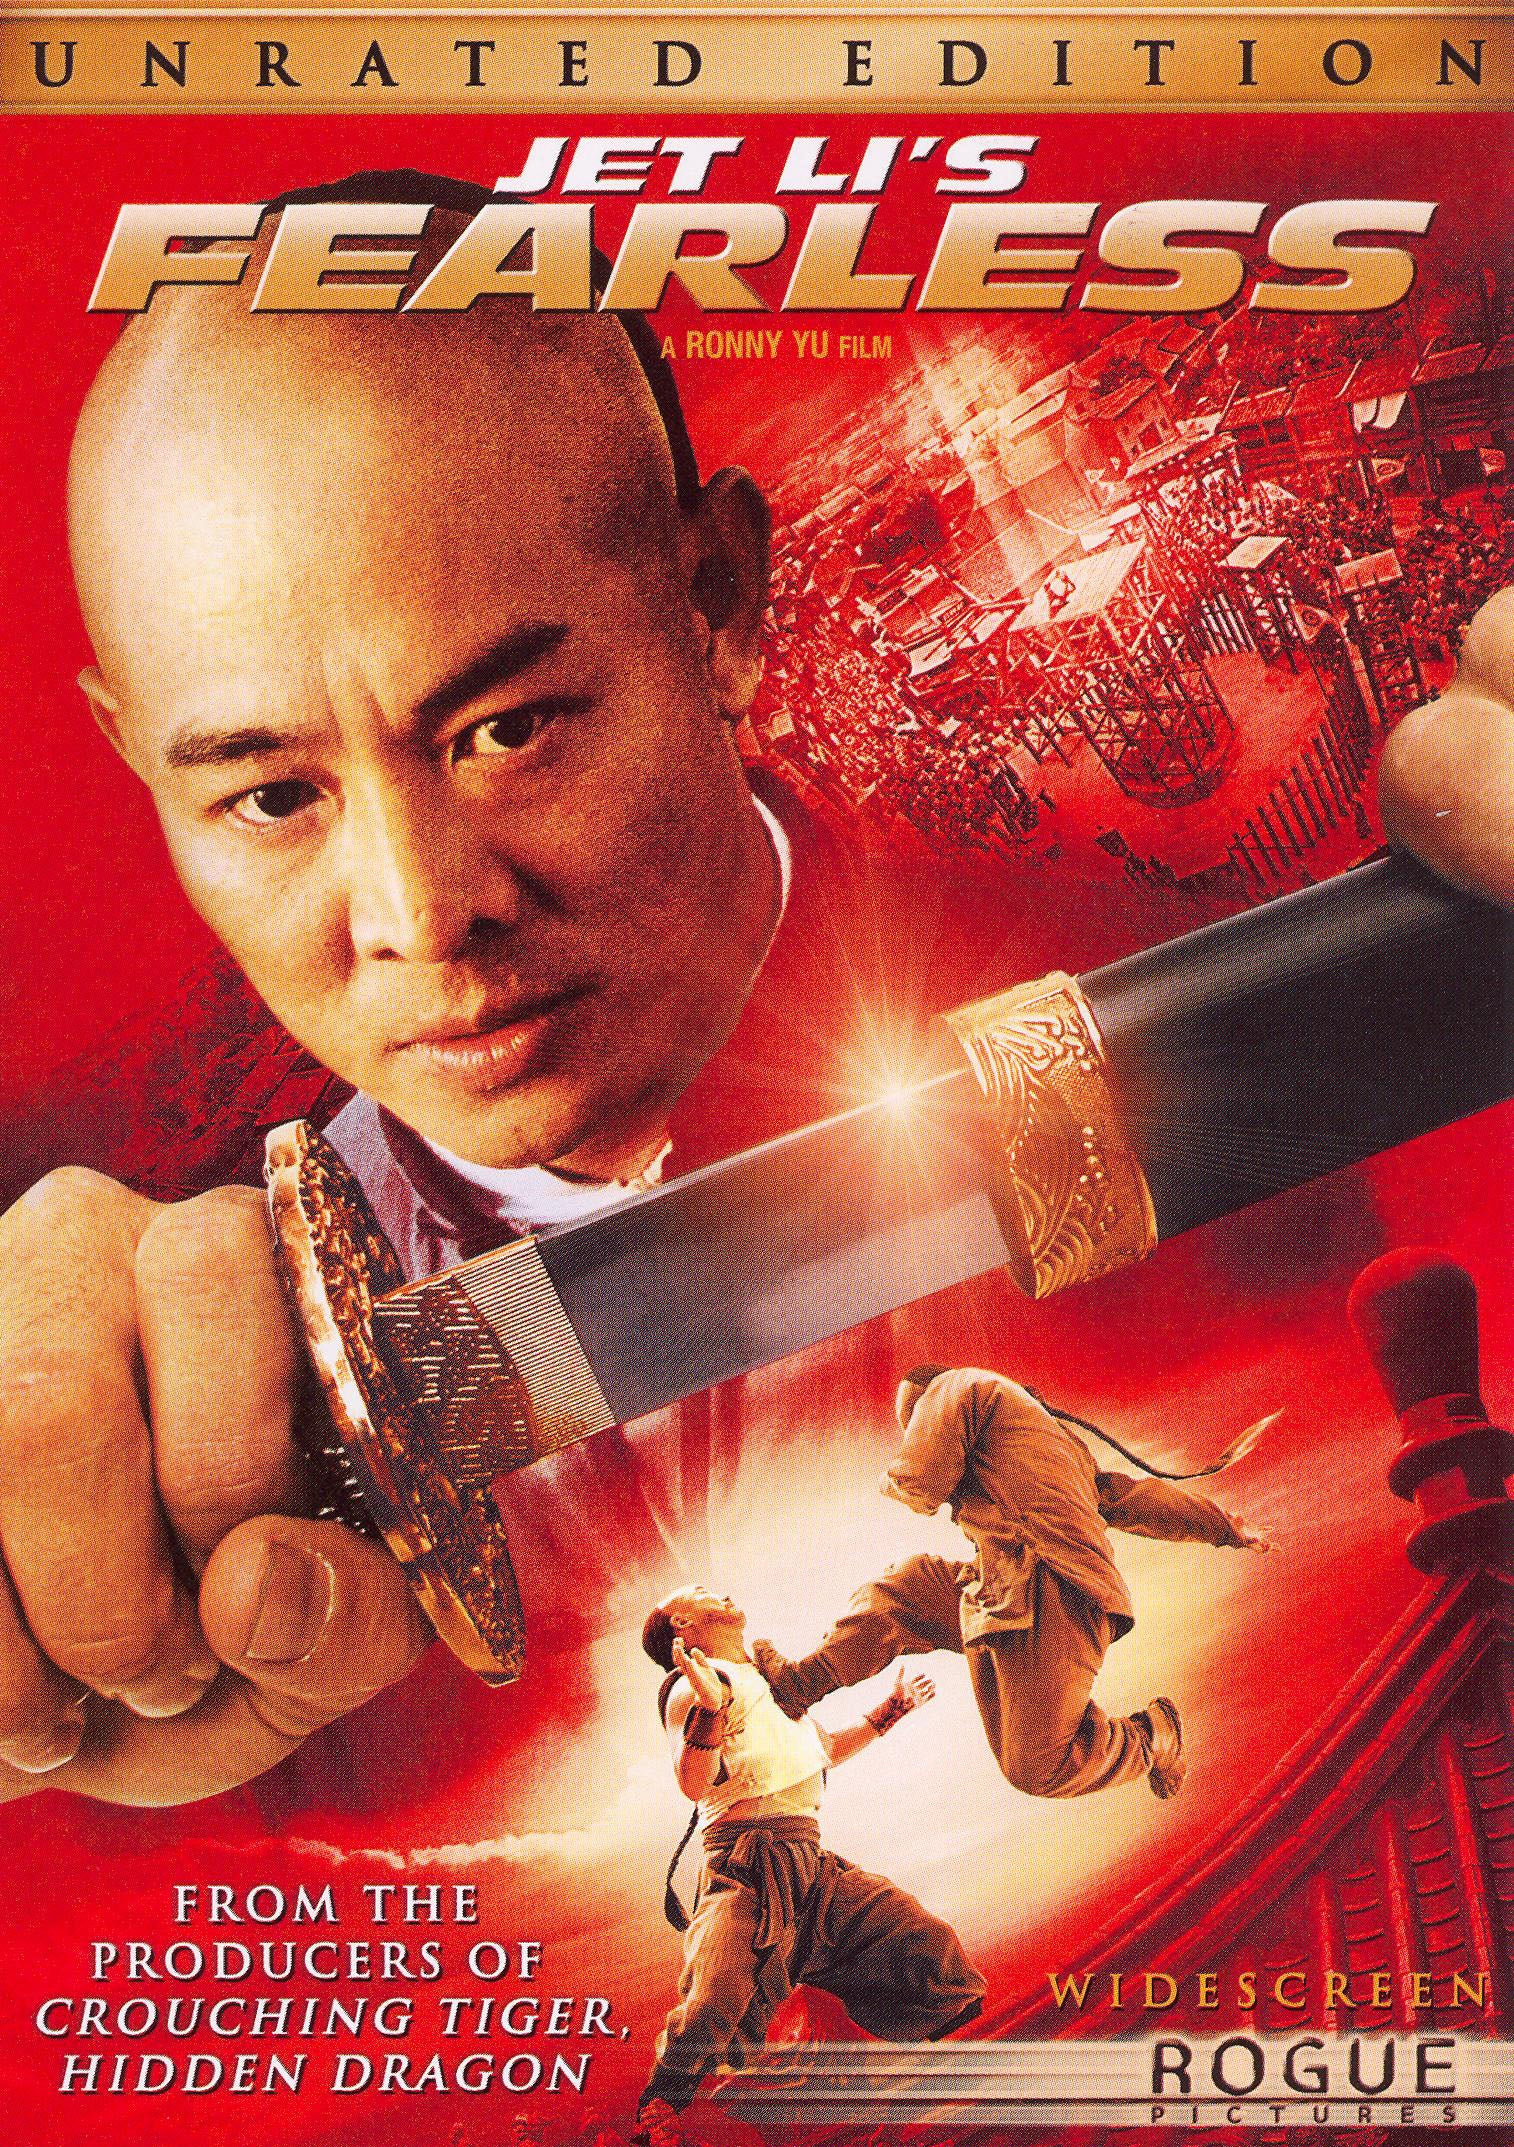 Jet Li's Fearless [WS] [Unrated/Theatrical] cover art